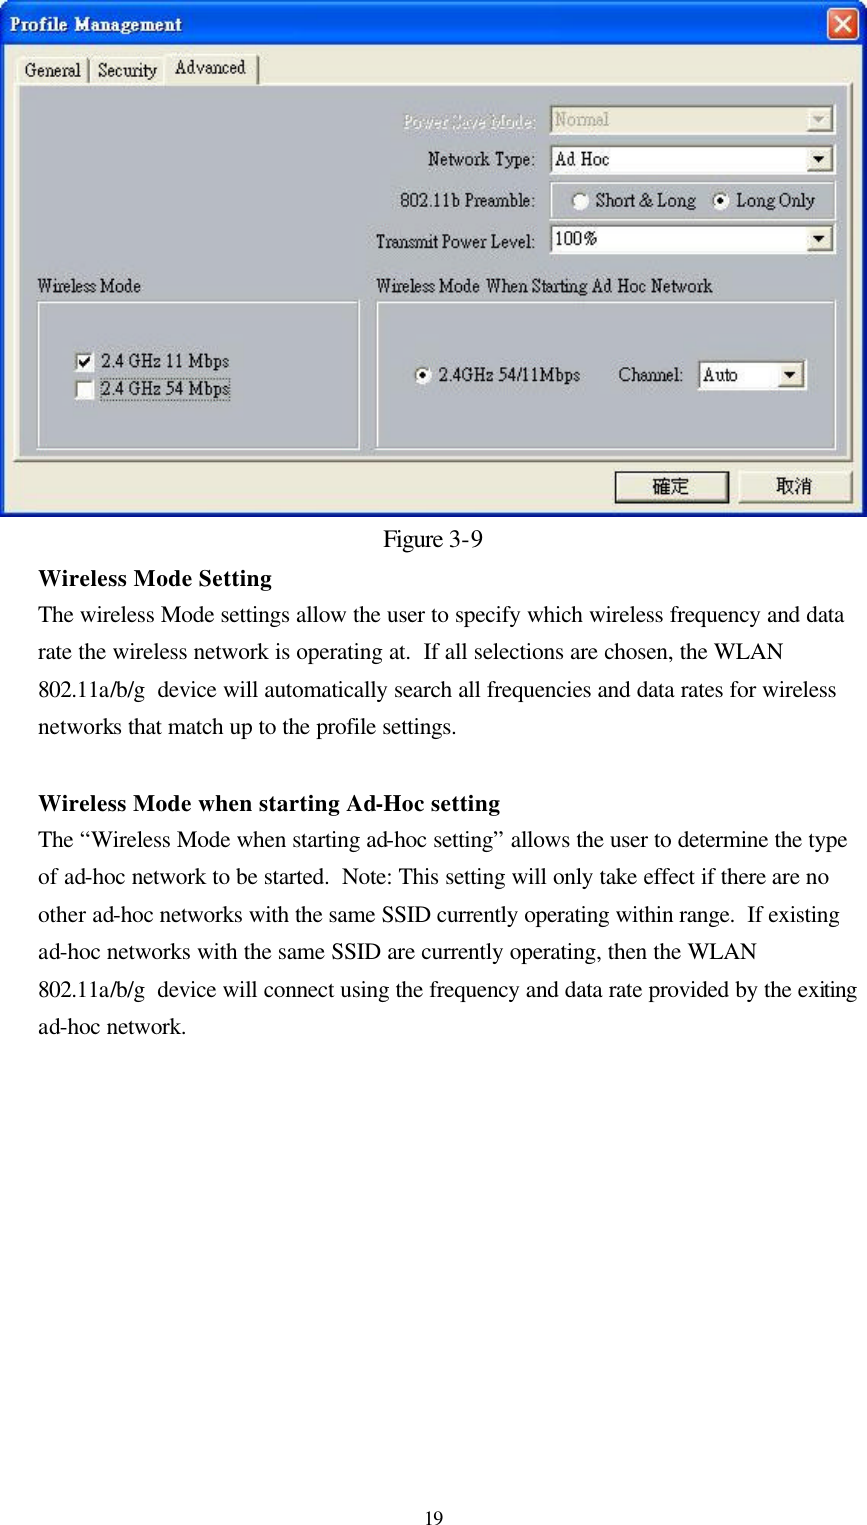  19Figure 3-9 Wireless Mode Setting The wireless Mode settings allow the user to specify which wireless frequency and data rate the wireless network is operating at.  If all selections are chosen, the WLAN 802.11a/b/g  device will automatically search all frequencies and data rates for wireless networks that match up to the profile settings.   Wireless Mode when starting Ad-Hoc setting The “Wireless Mode when starting ad-hoc setting” allows the user to determine the type of ad-hoc network to be started.  Note: This setting will only take effect if there are no other ad-hoc networks with the same SSID currently operating within range.  If existing ad-hoc networks with the same SSID are currently operating, then the WLAN 802.11a/b/g  device will connect using the frequency and data rate provided by the exiting ad-hoc network.  